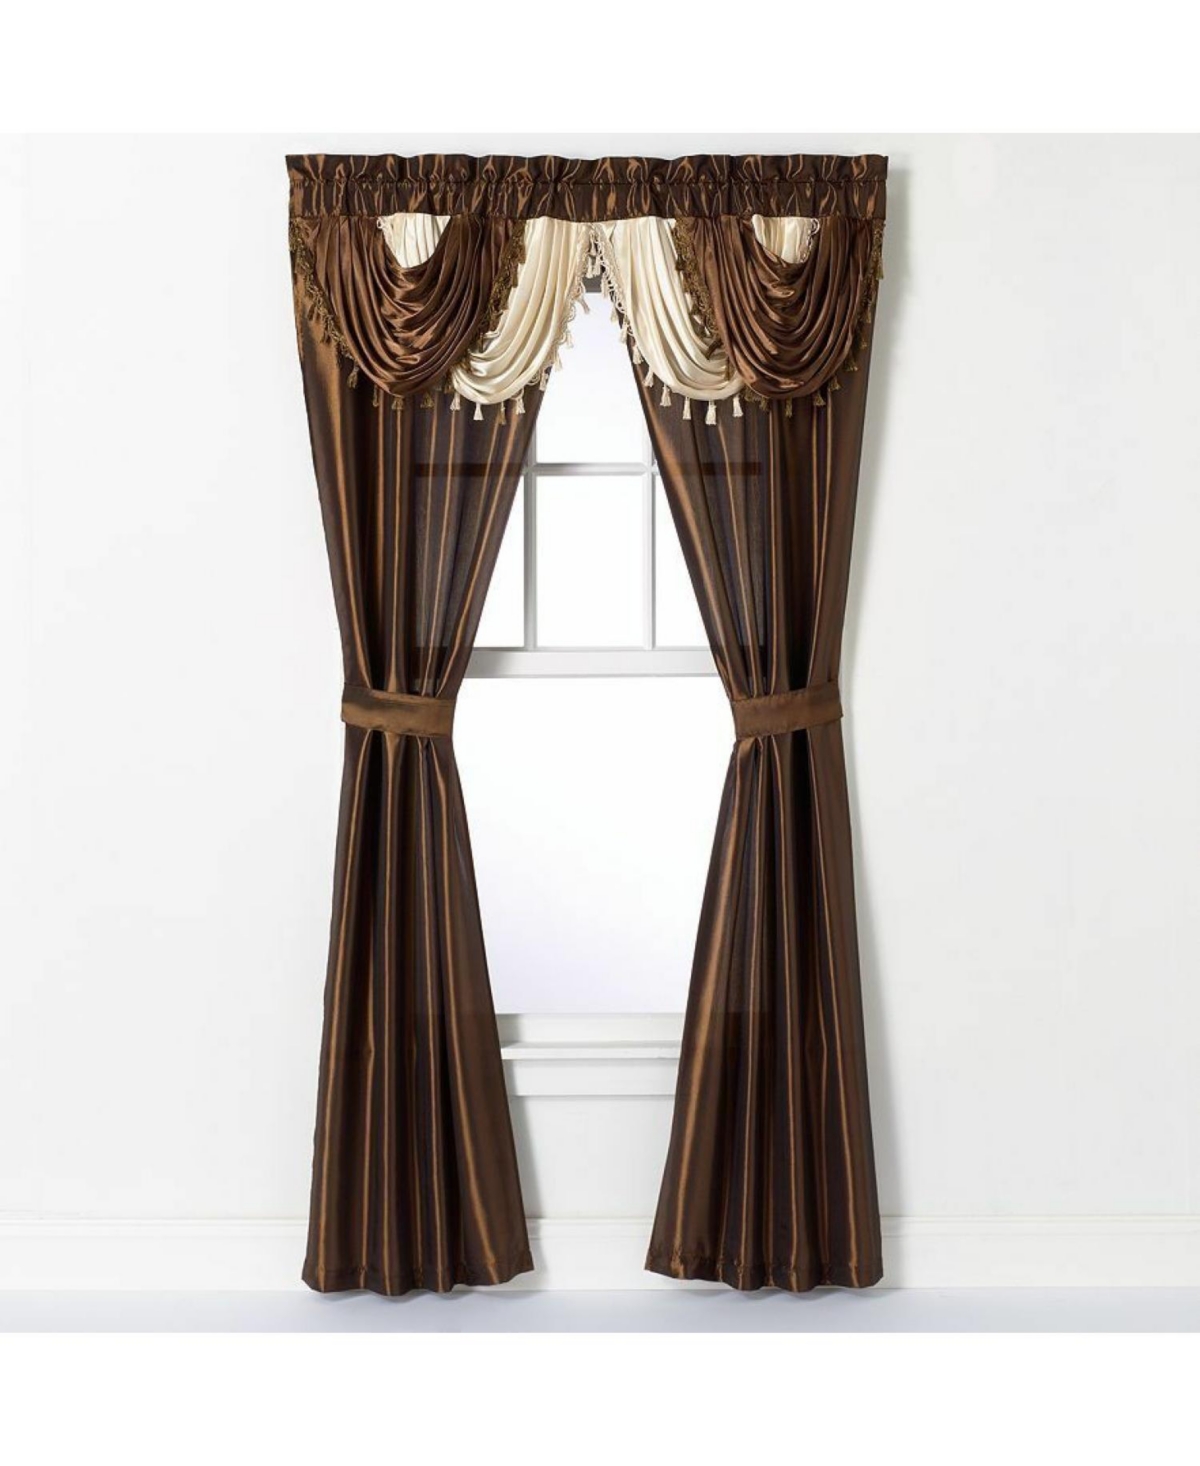 Satin Semi Sheer Complete 5 Piece Window in a Bag Attached Curtain Set - Chocolate/brown